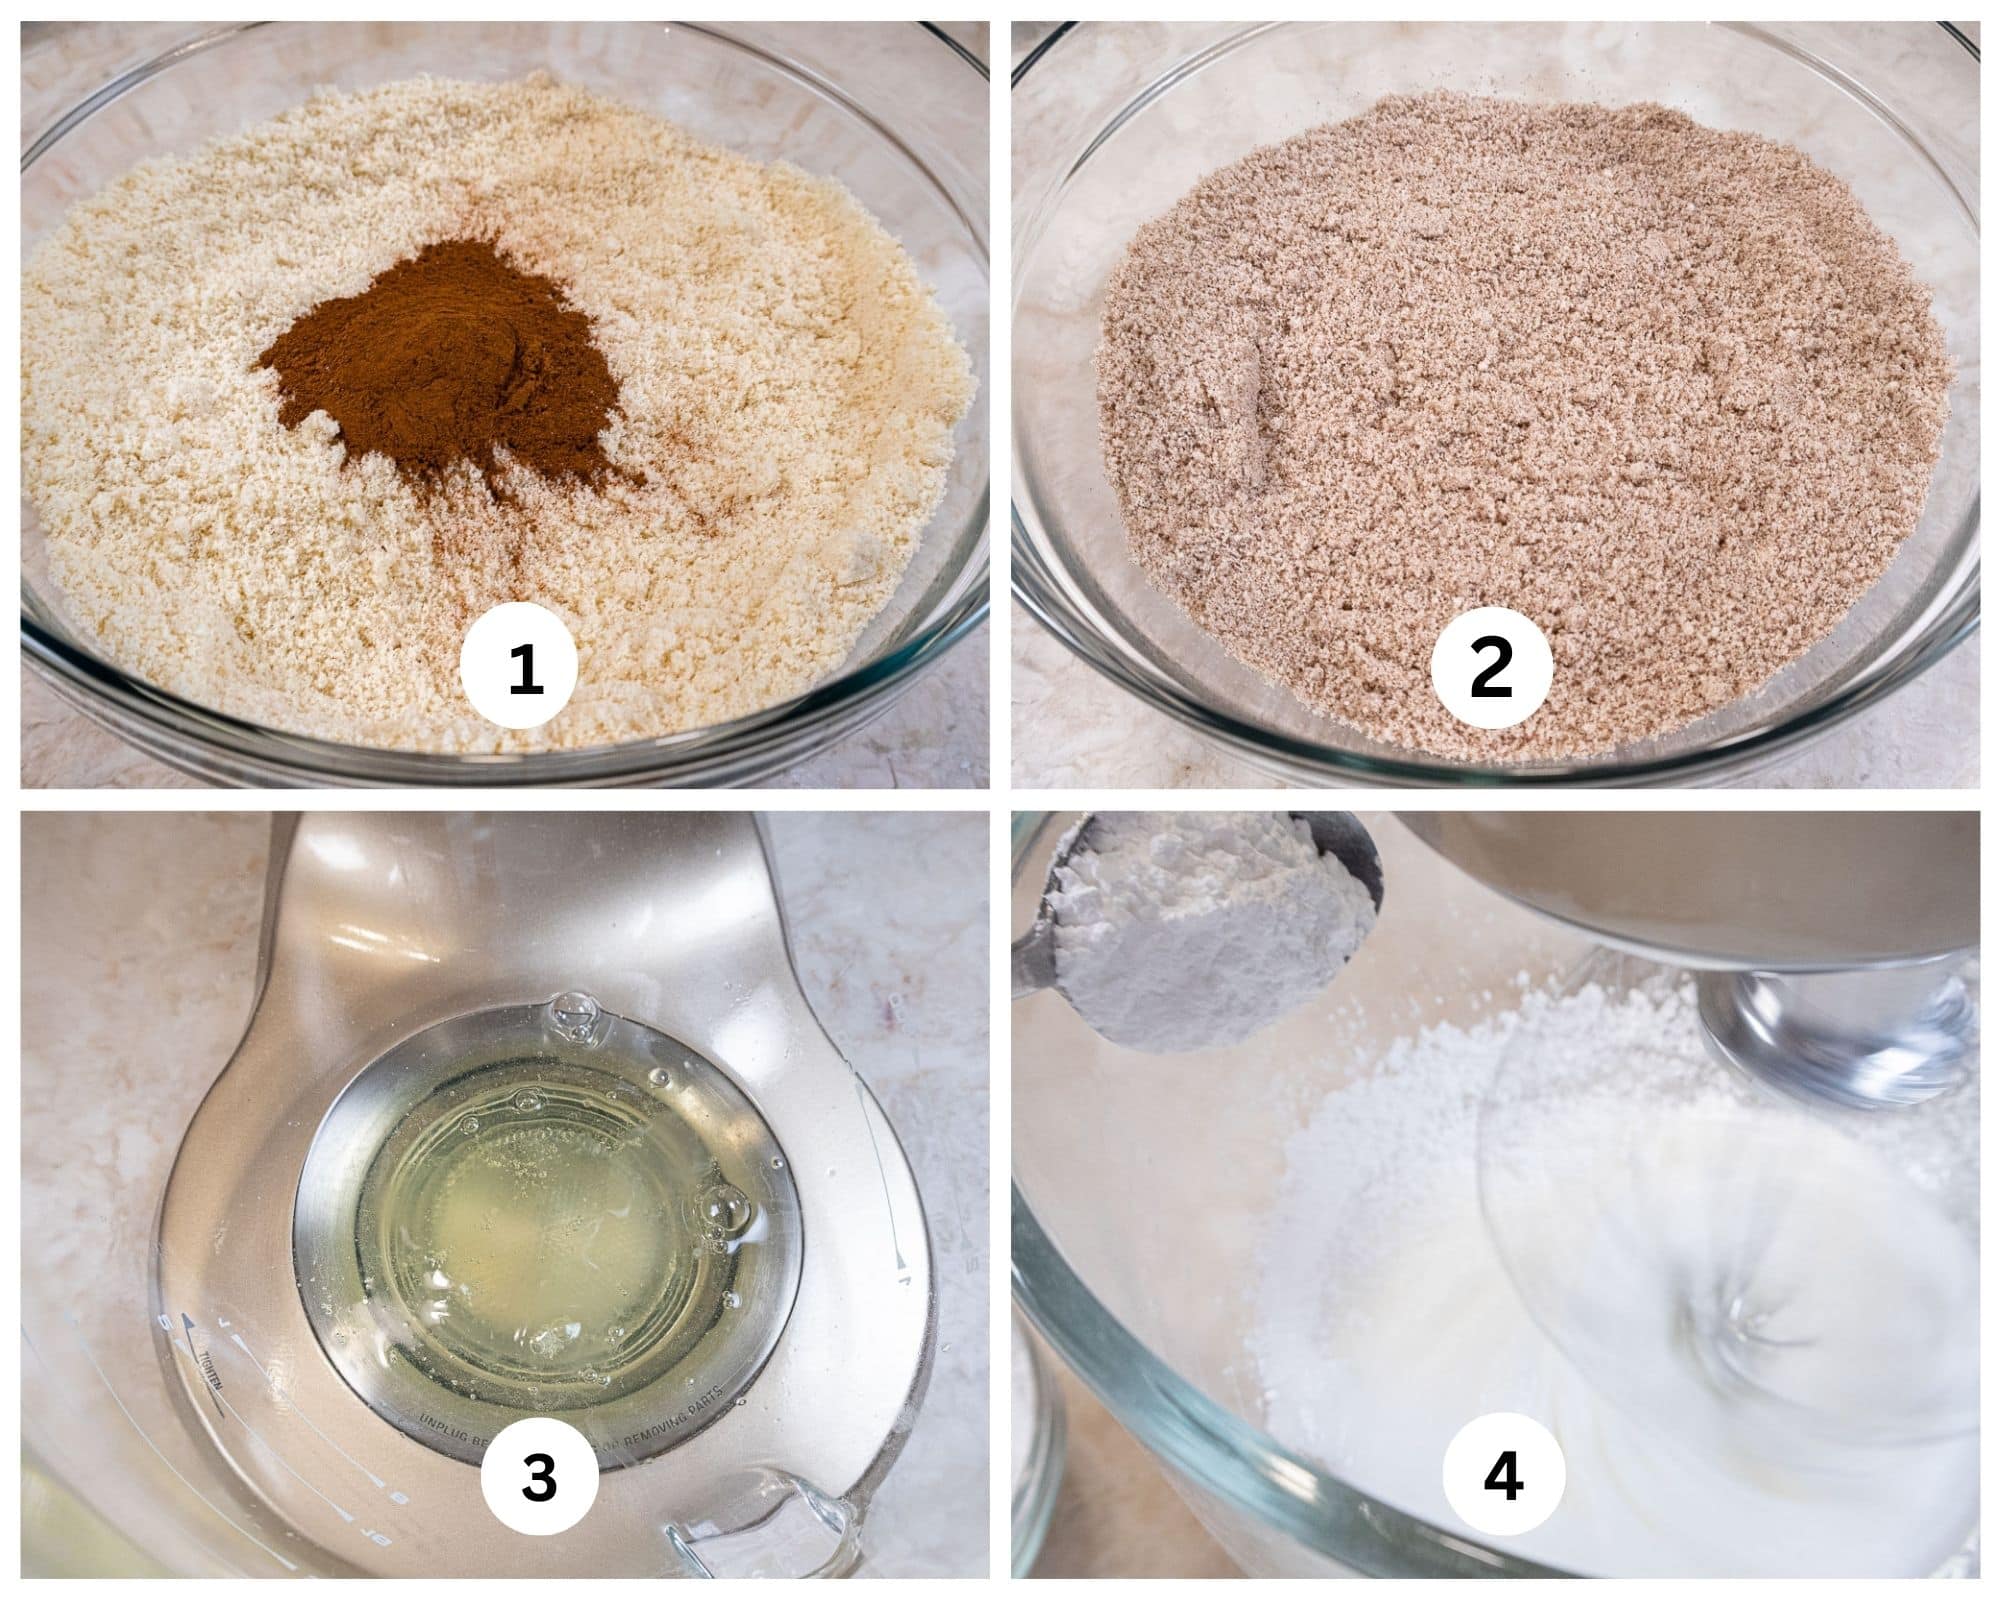 This collage shows the almond flour and cinnamon in a large bowl, mixed together, egg whites in mixing bowl and powdered sugar being added.